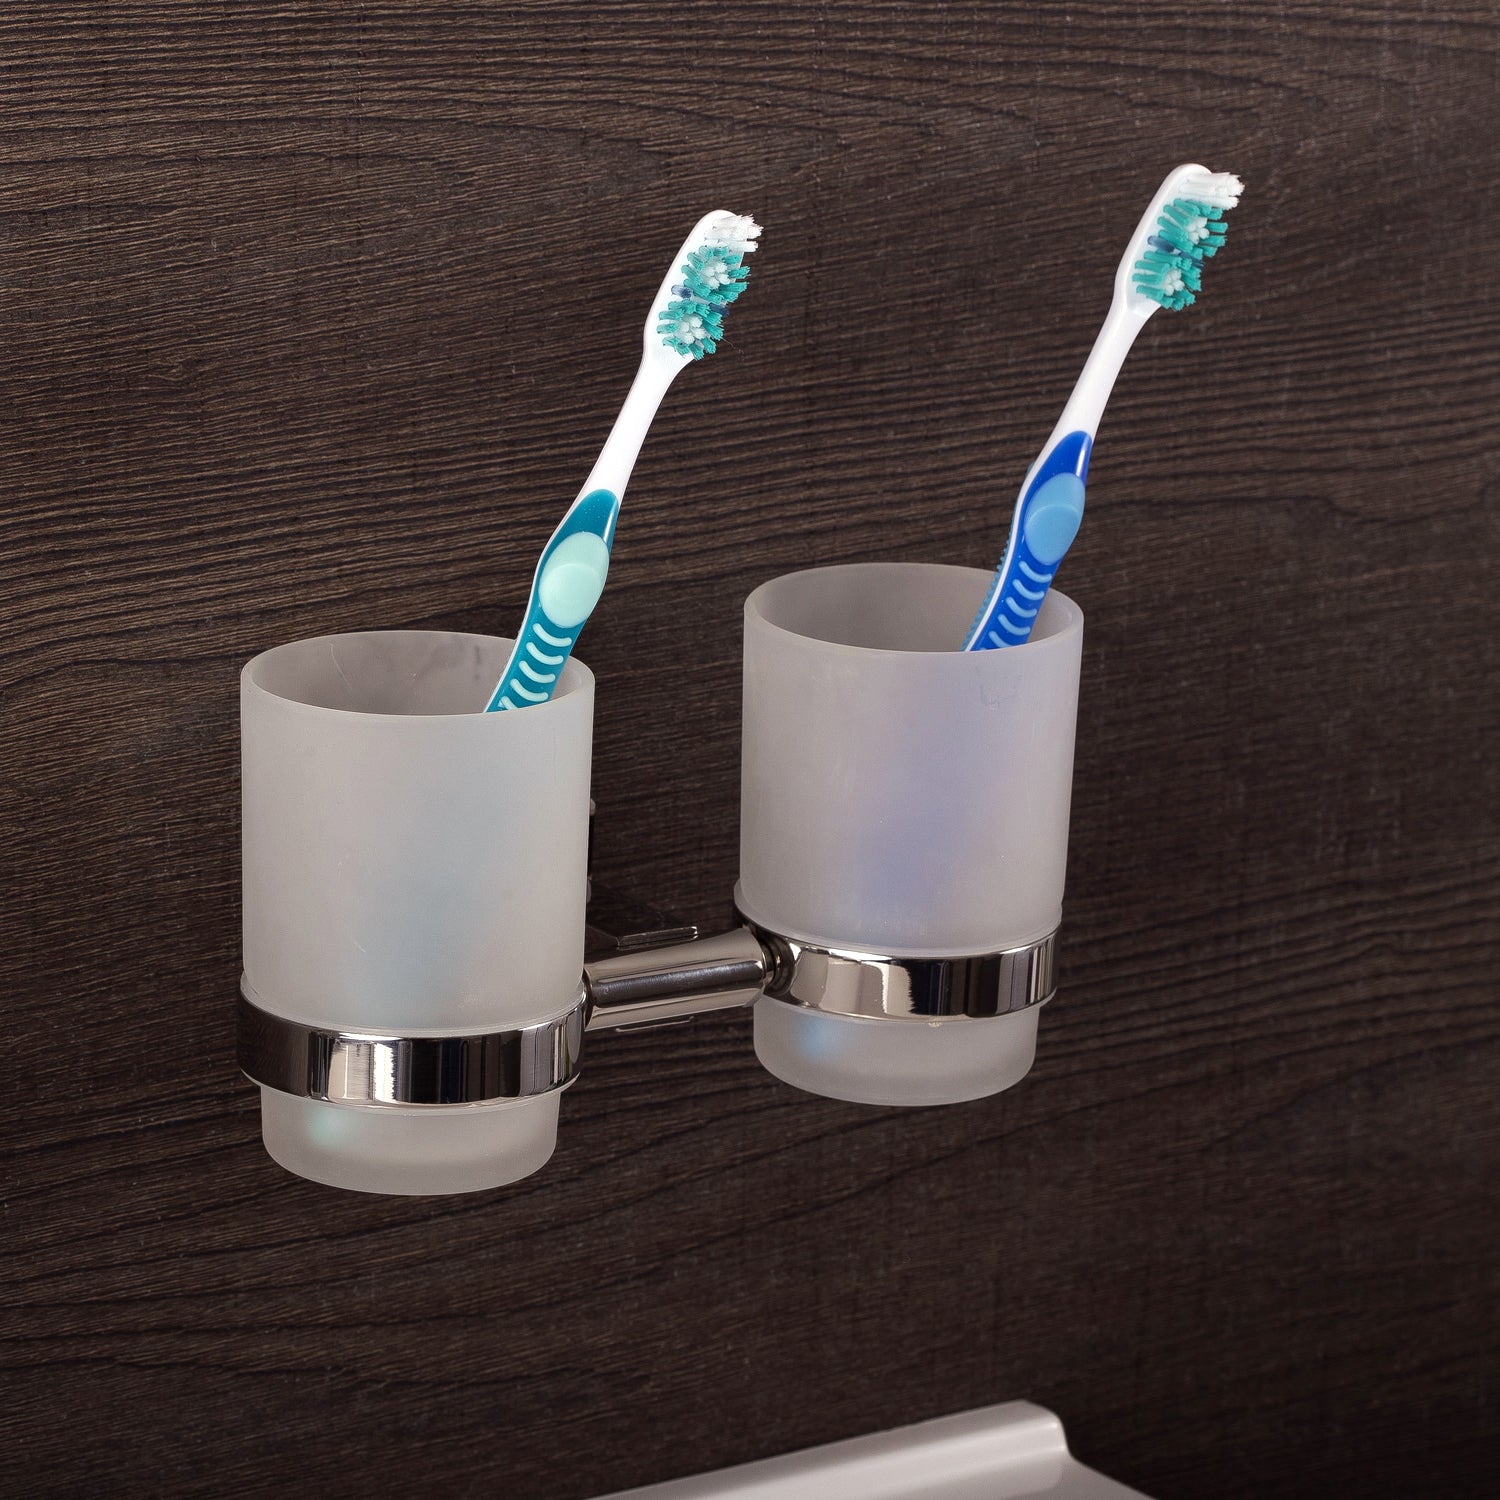 DAX Bathroom Double Tumbler Toothbrush Holder, Wall Mount Stainless Steel with Glass Cup, Satin Finish, 7-1/16 x 3-3/4 x 3-3/4 Inches (DAX-G0114-S)